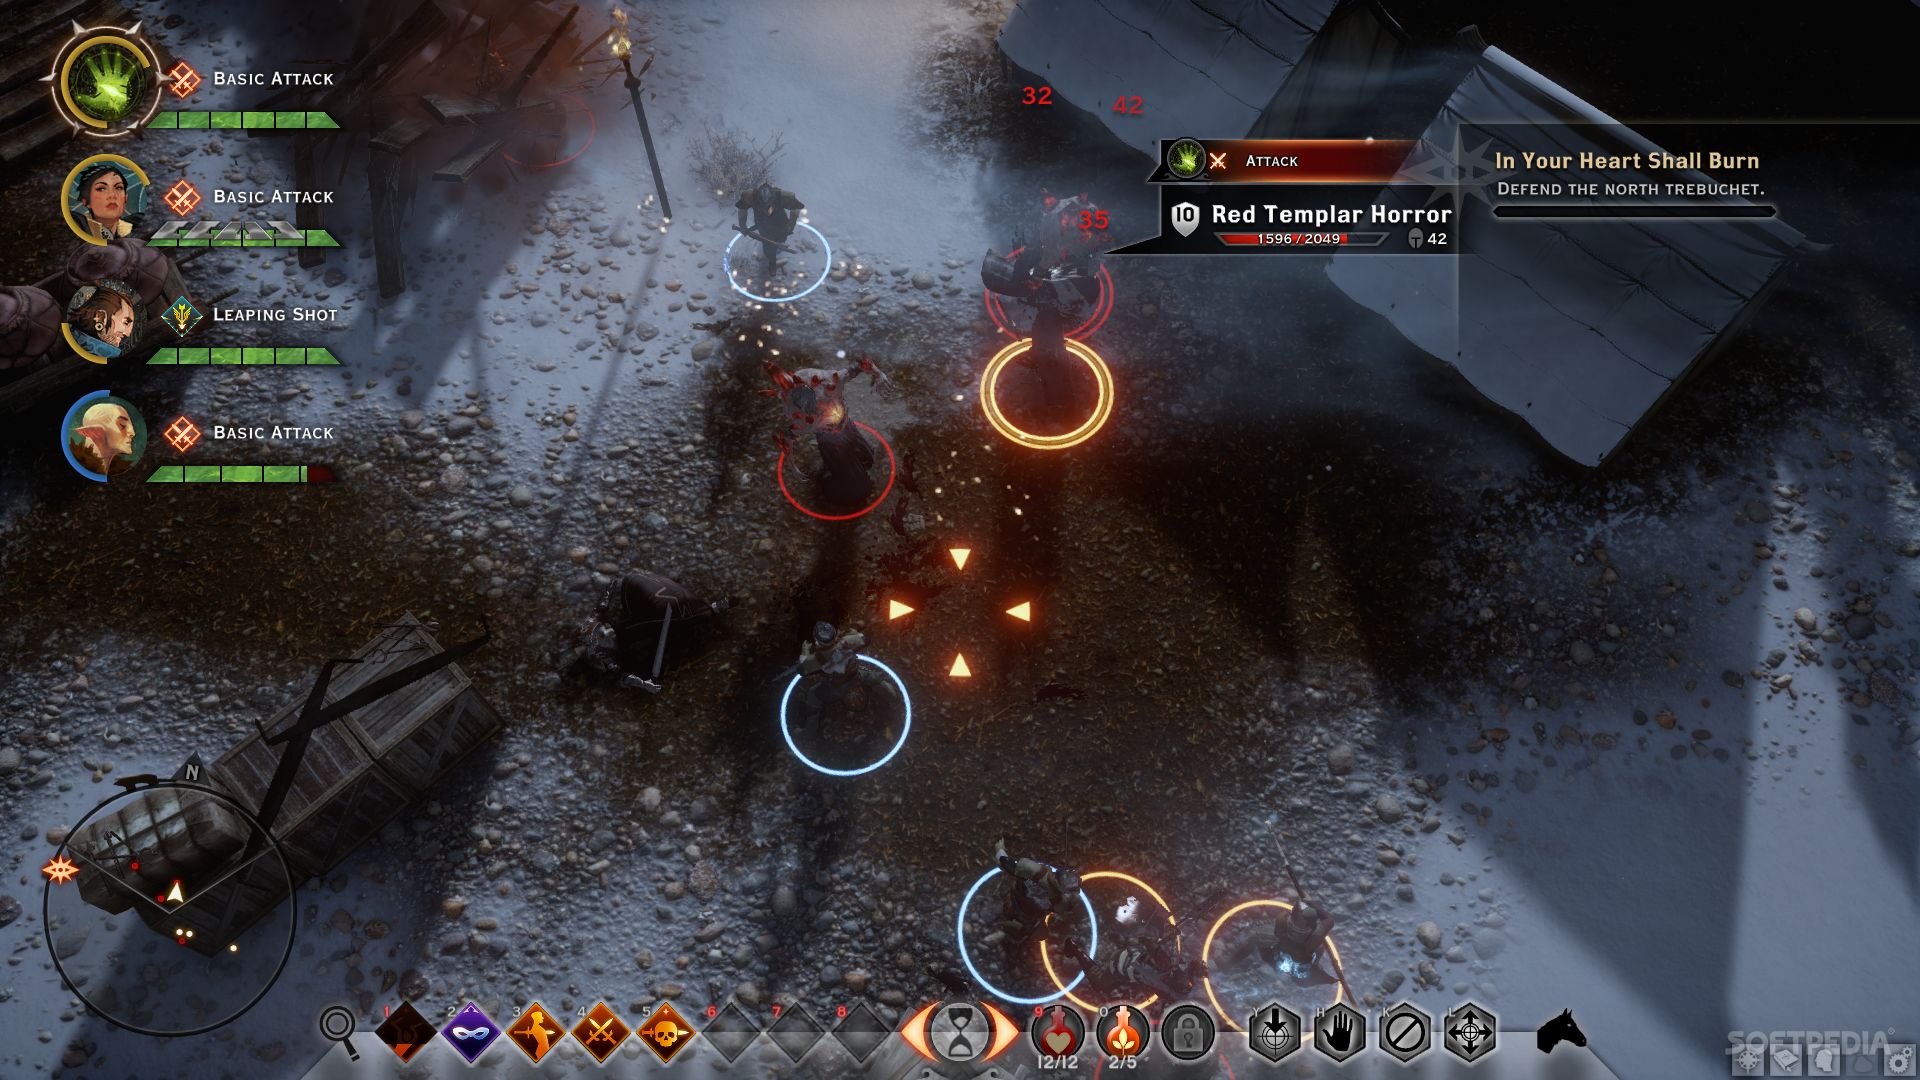 GOTY 2014 Game of the Year – Dragon Age: Inquisition